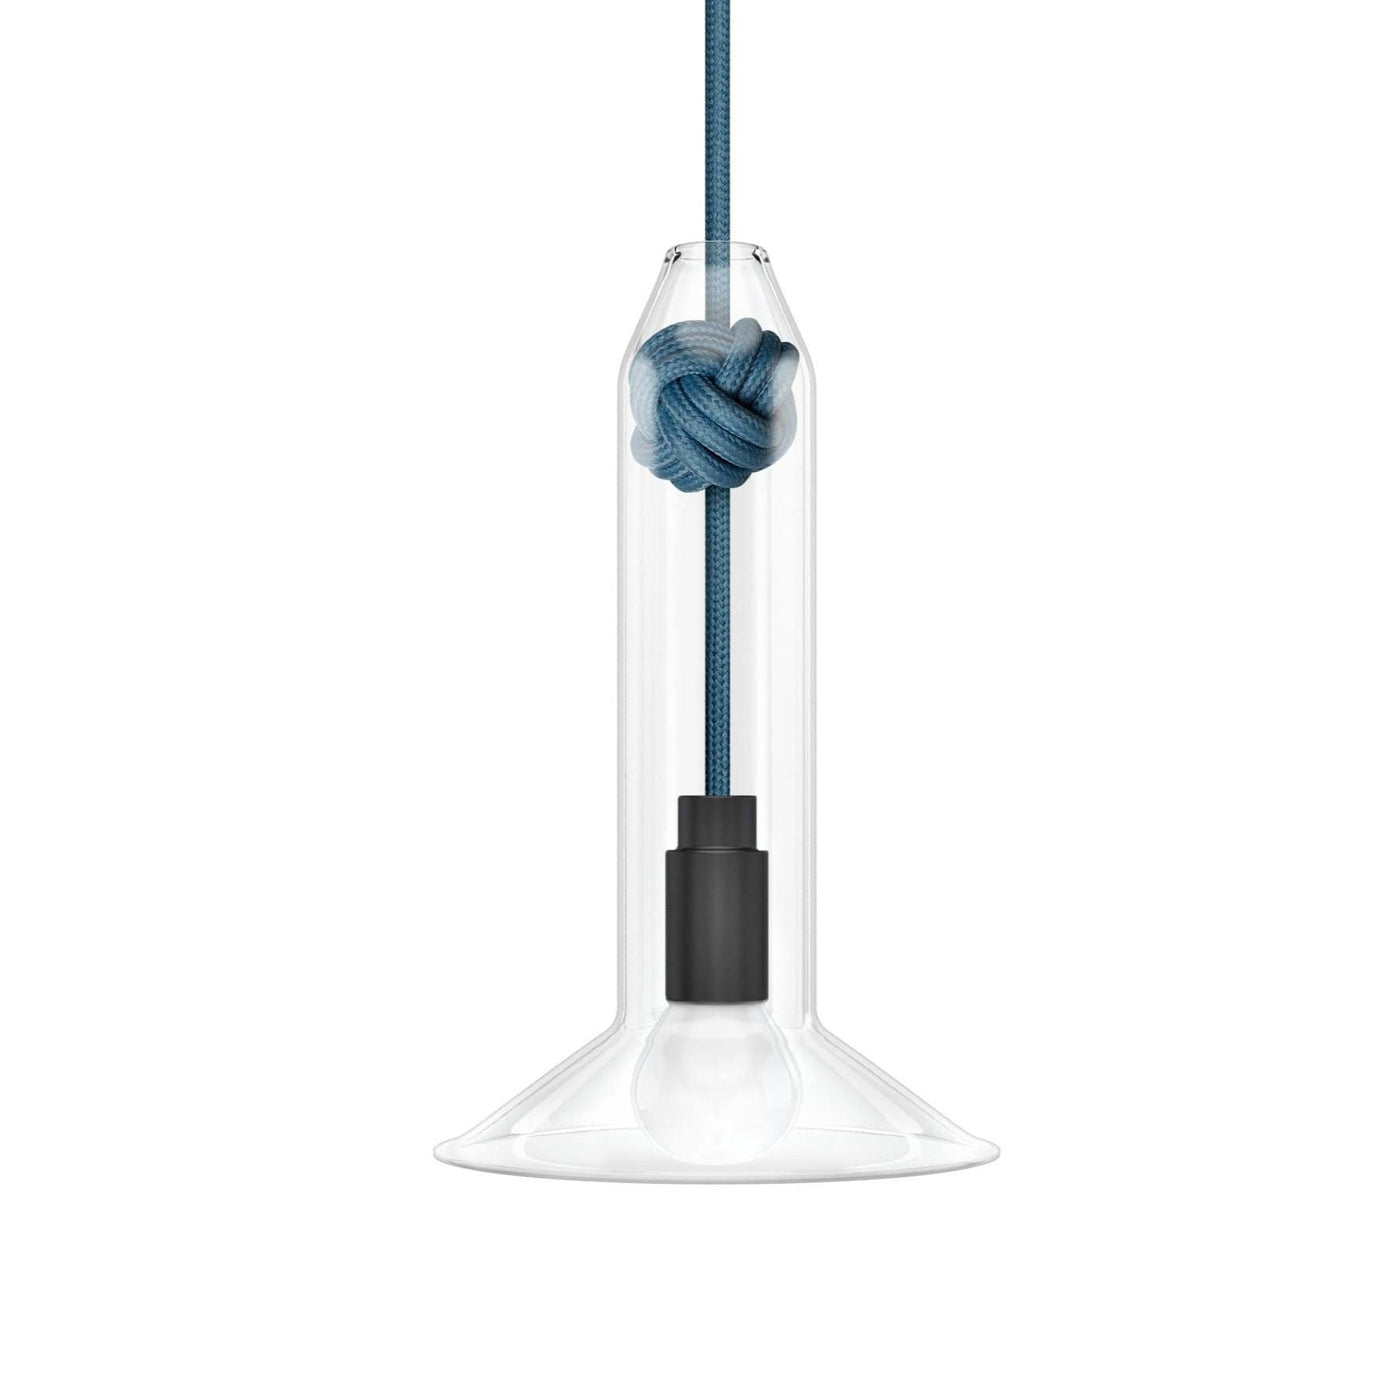 Vitamin small Knot Lamp ceiling pendant. Shop online at someday designs. #colour_mid-blue